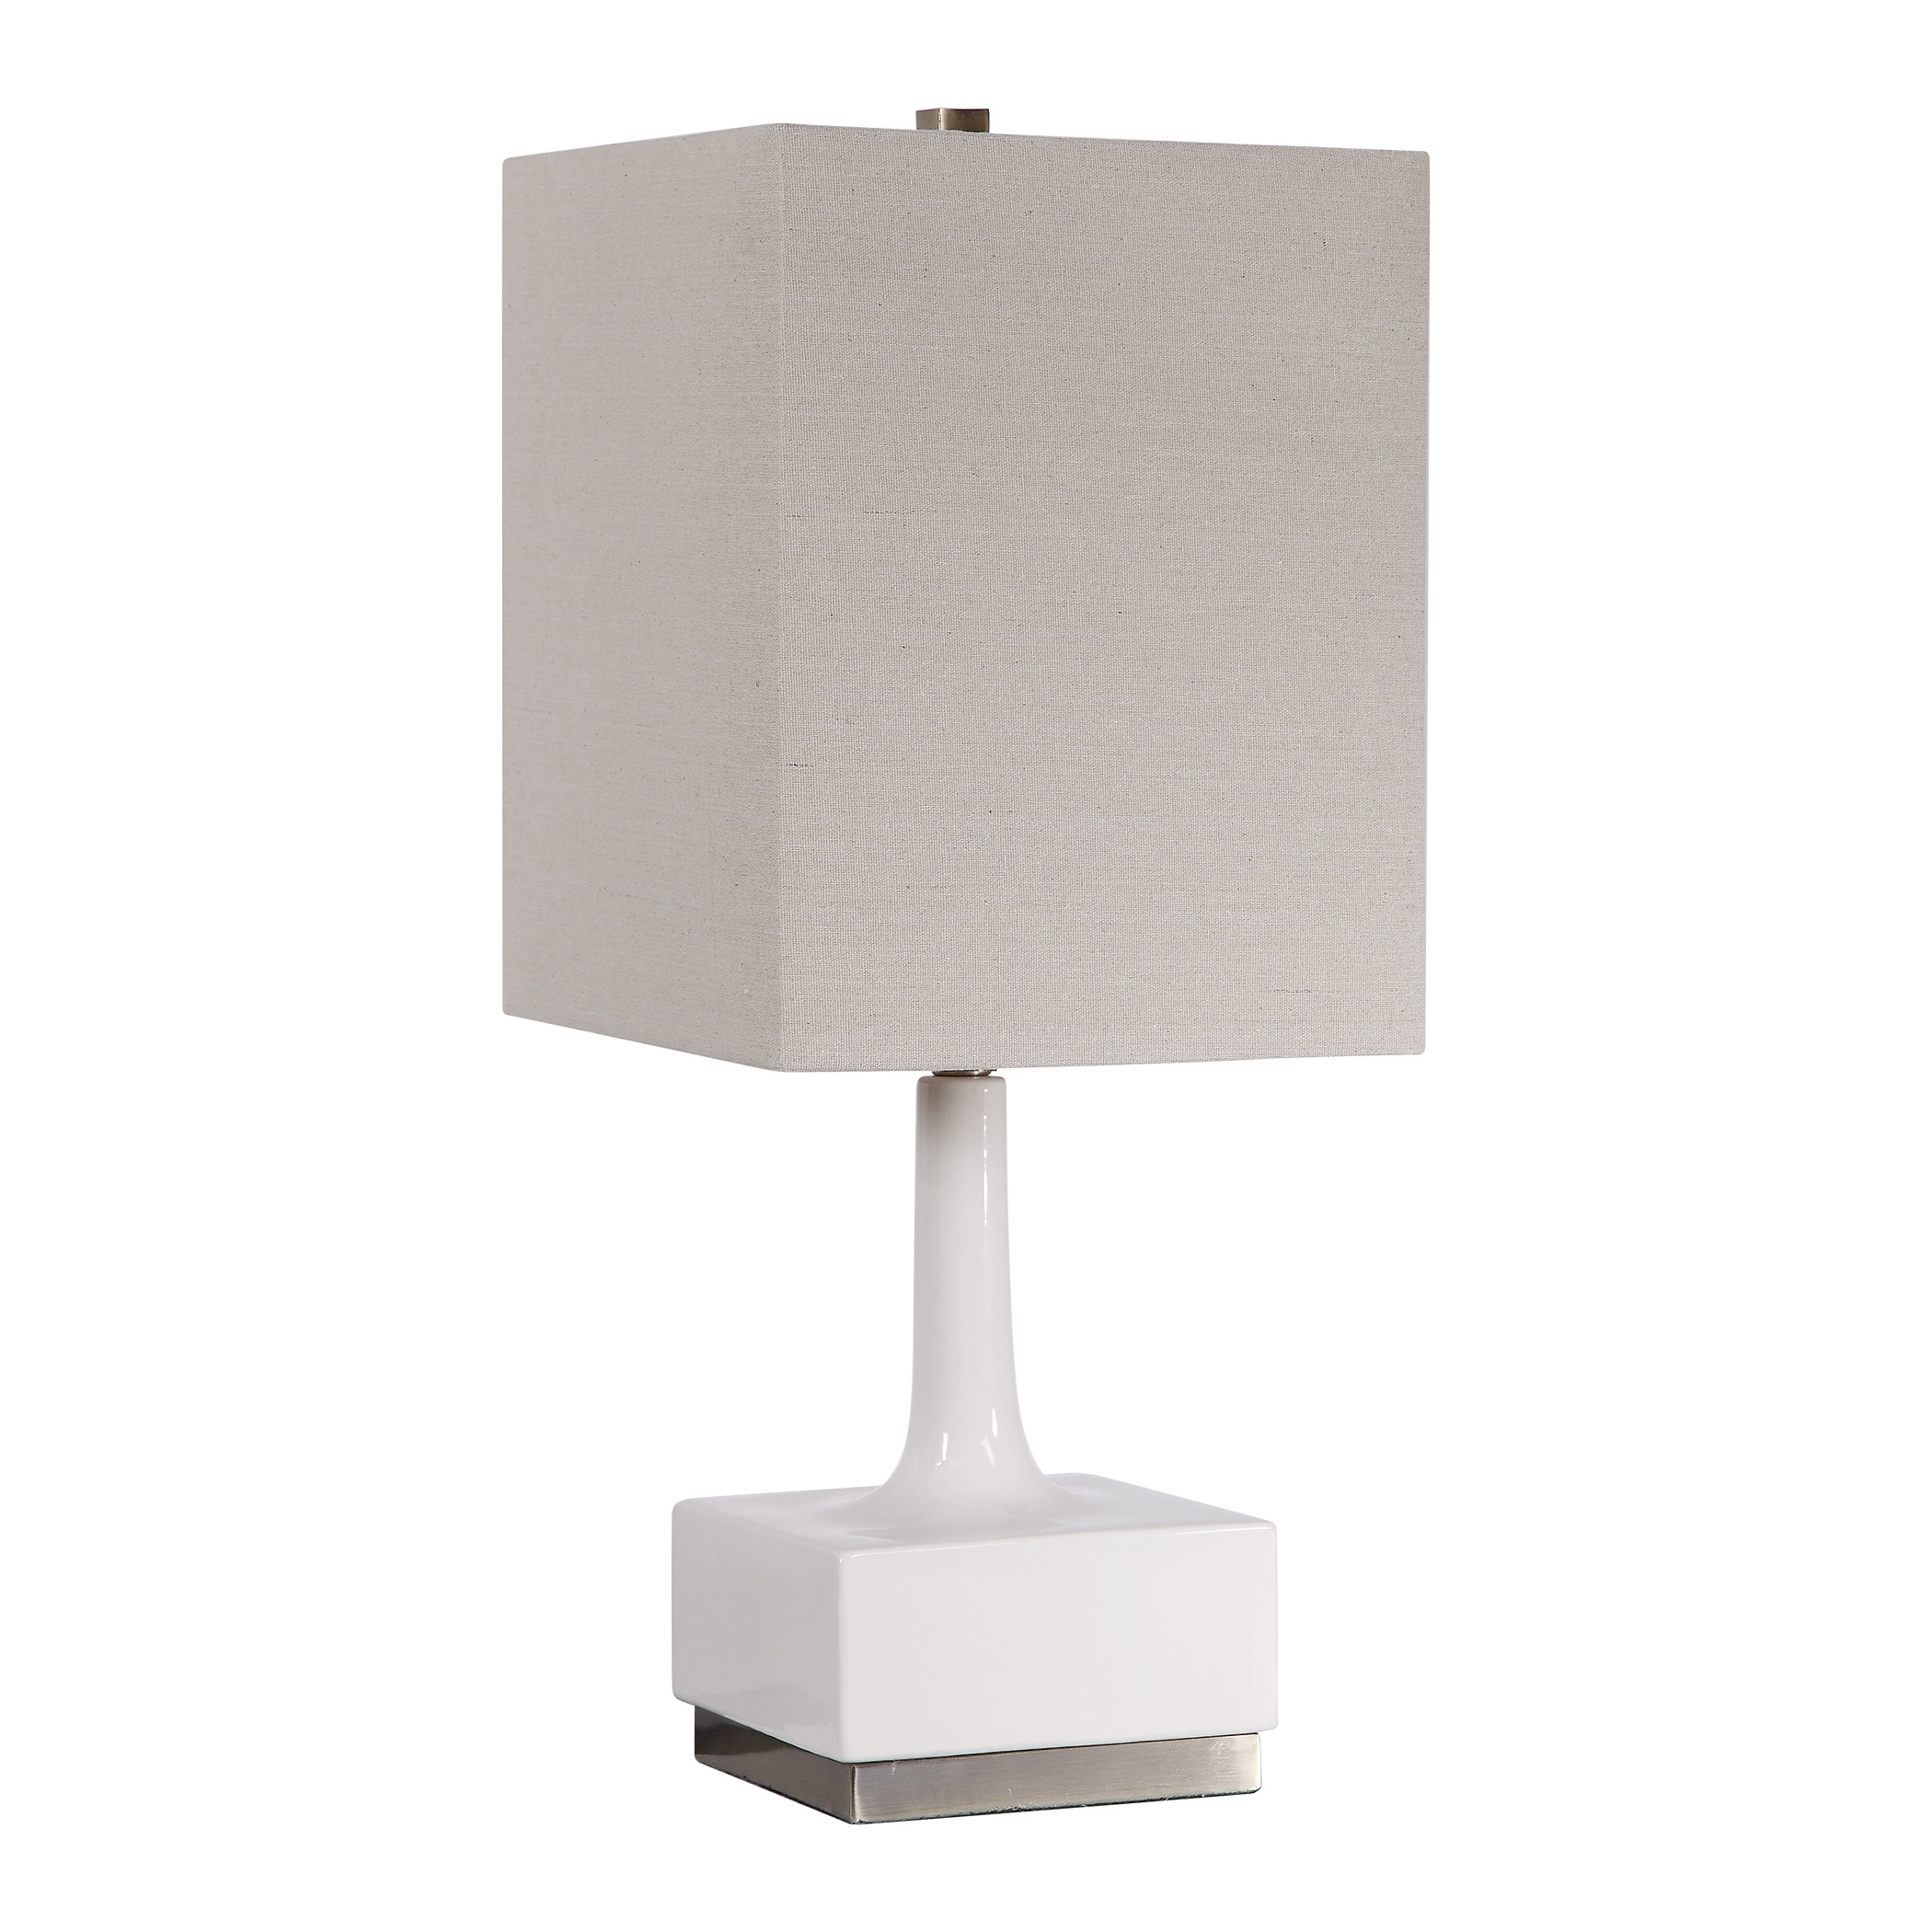 TABLE LAMP - Image 6